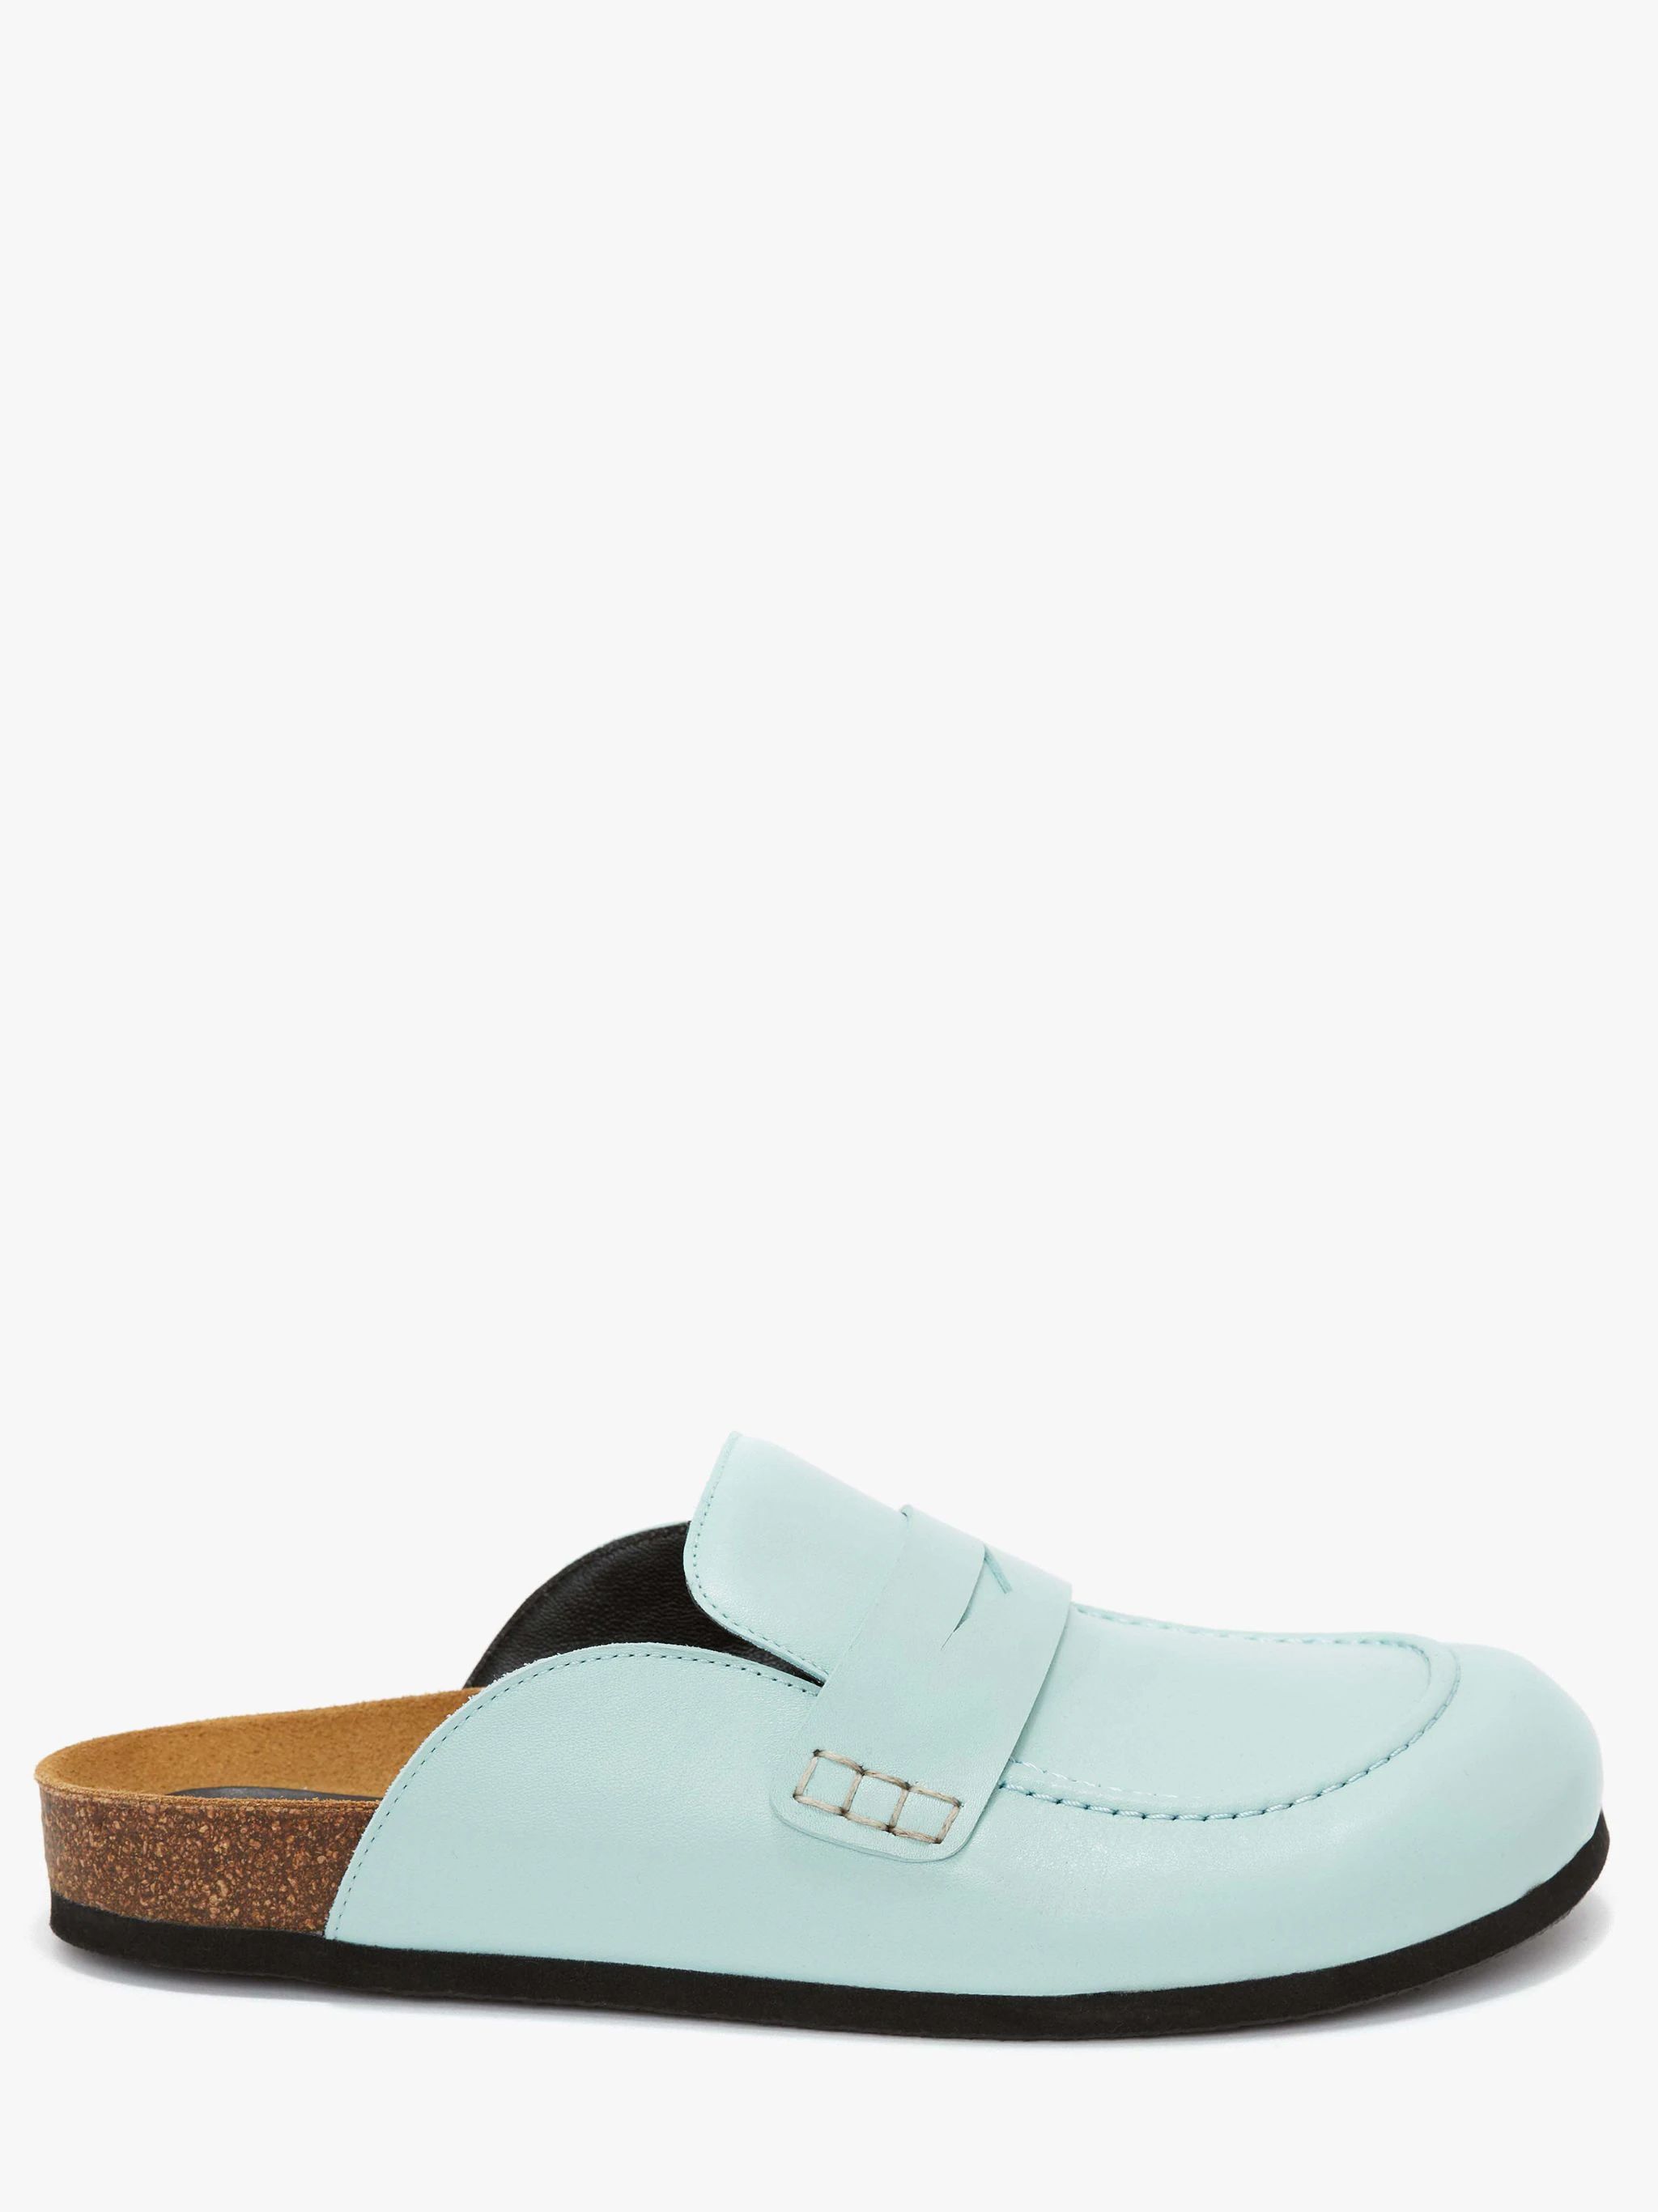 WOMEN'S LEATHER LOAFER MULES | JW Anderson